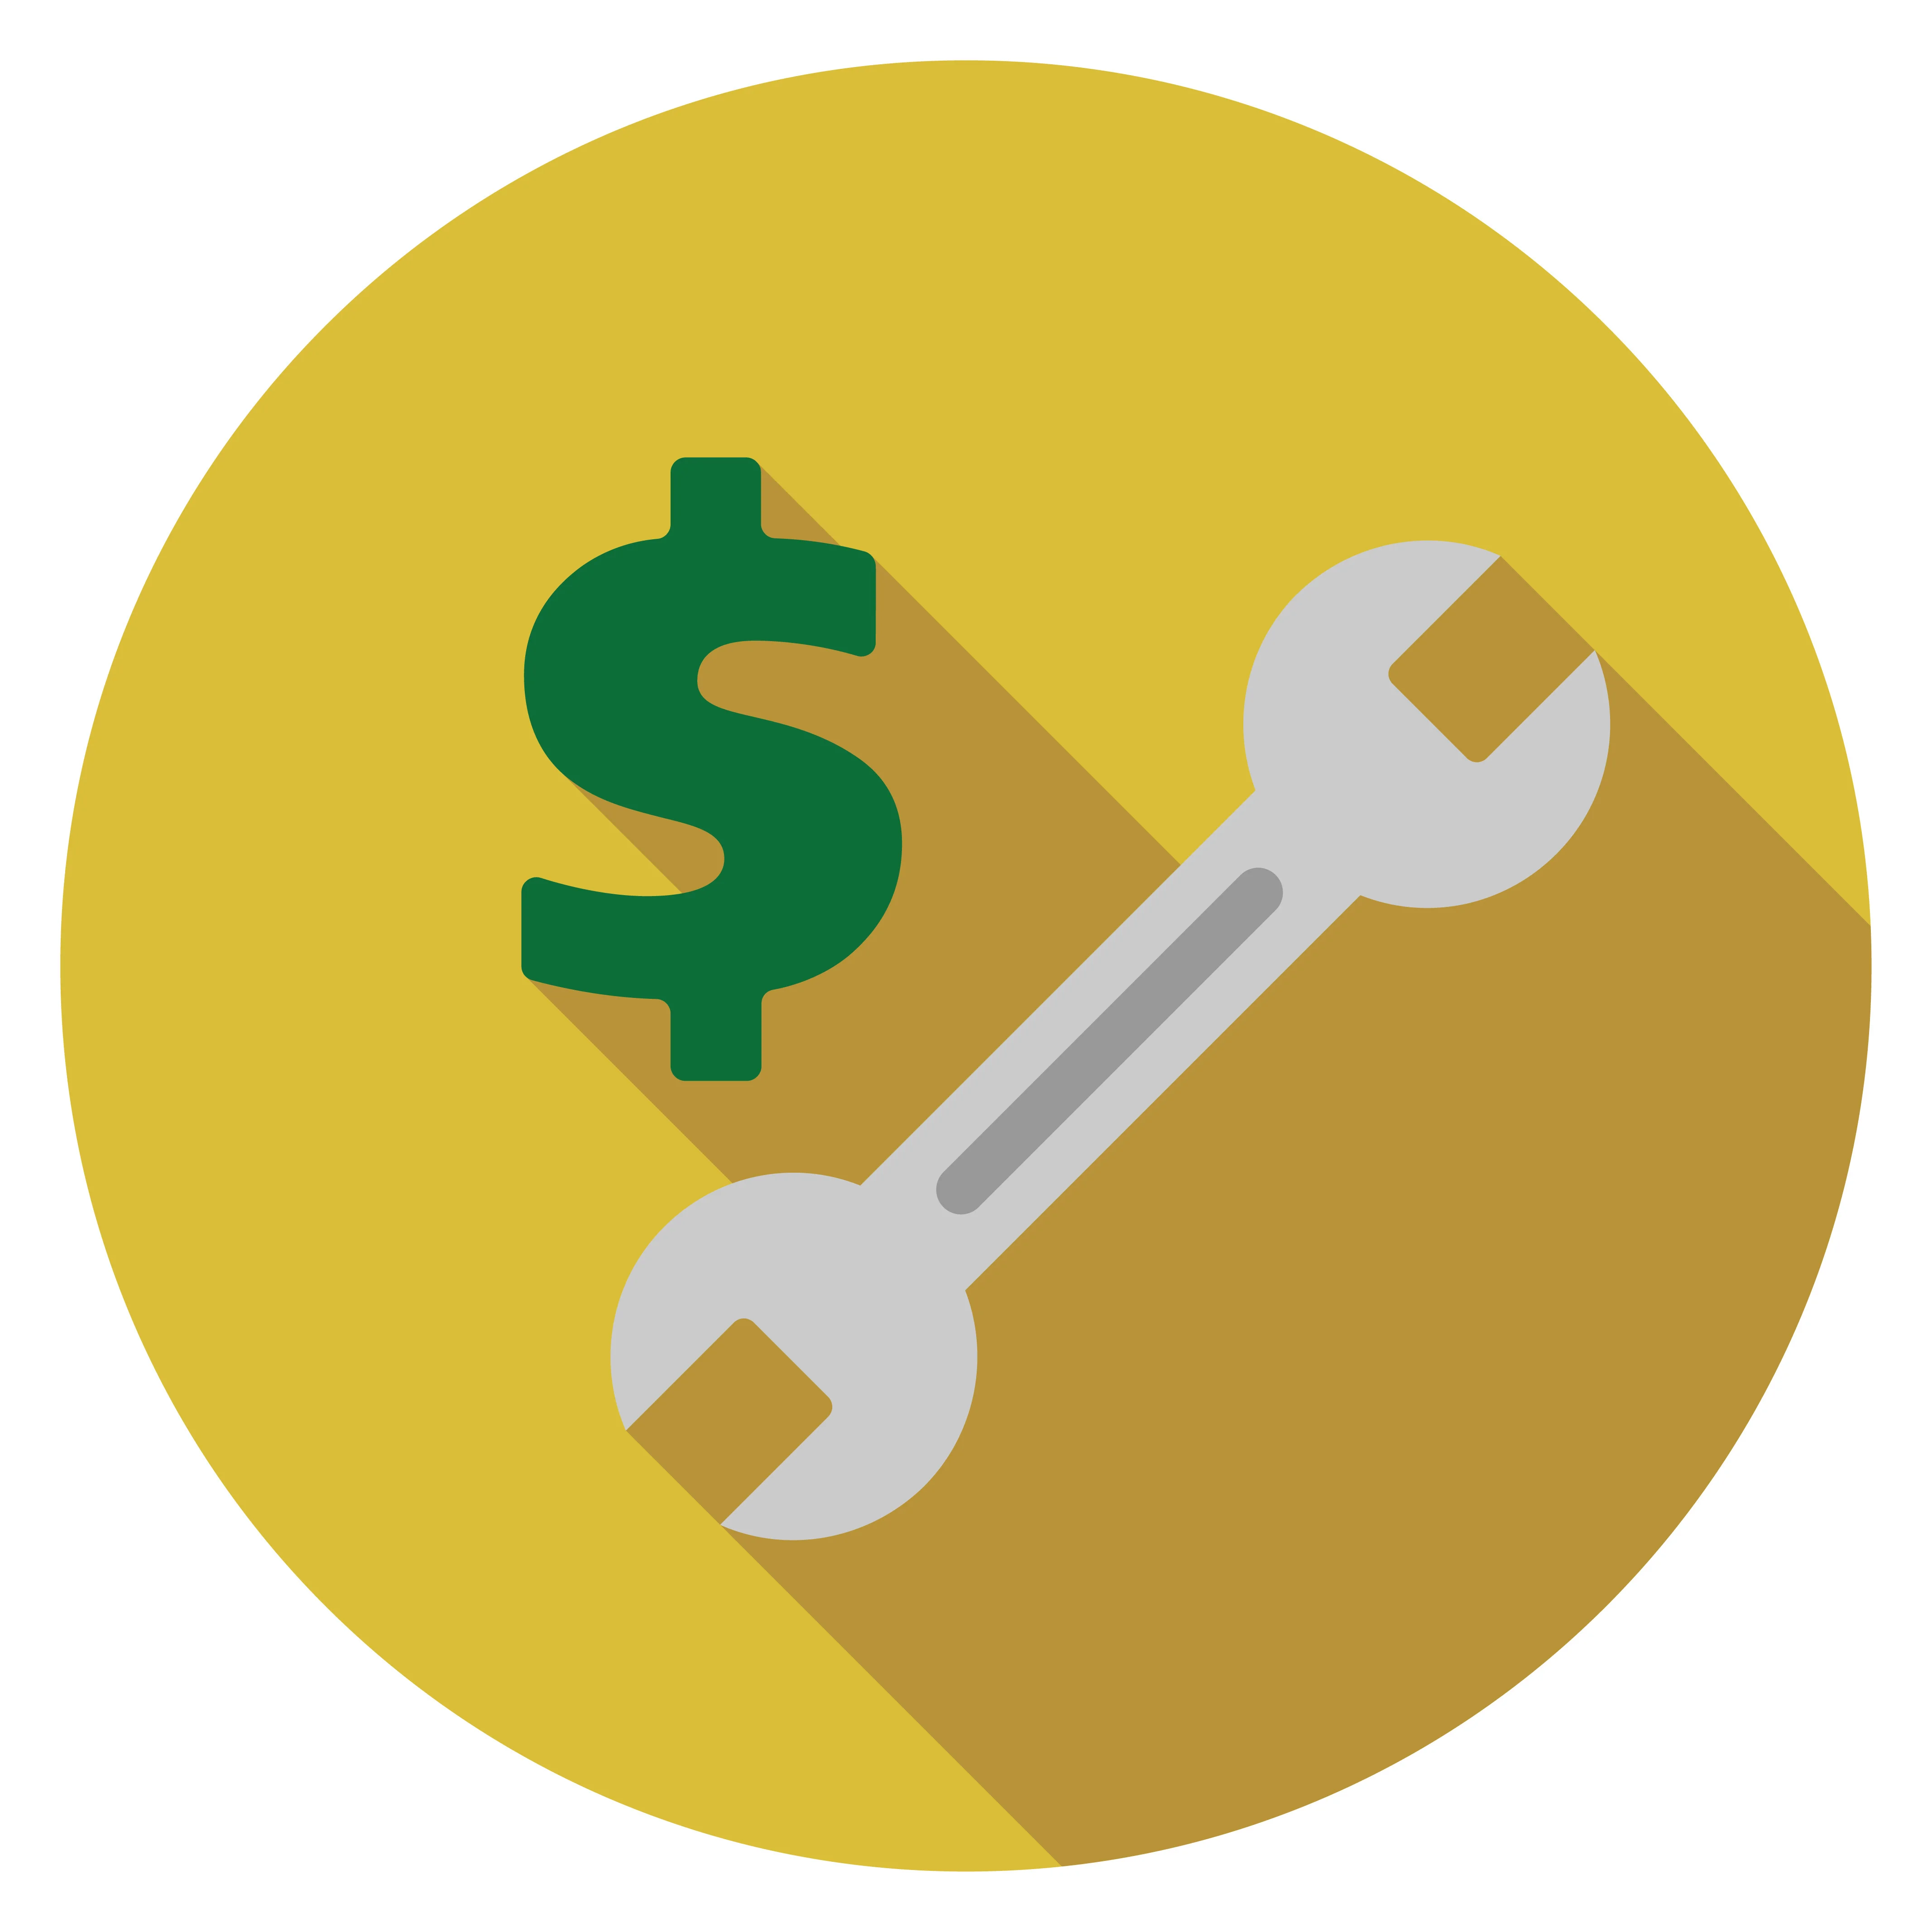 Clip art of a money symbol and a wrench